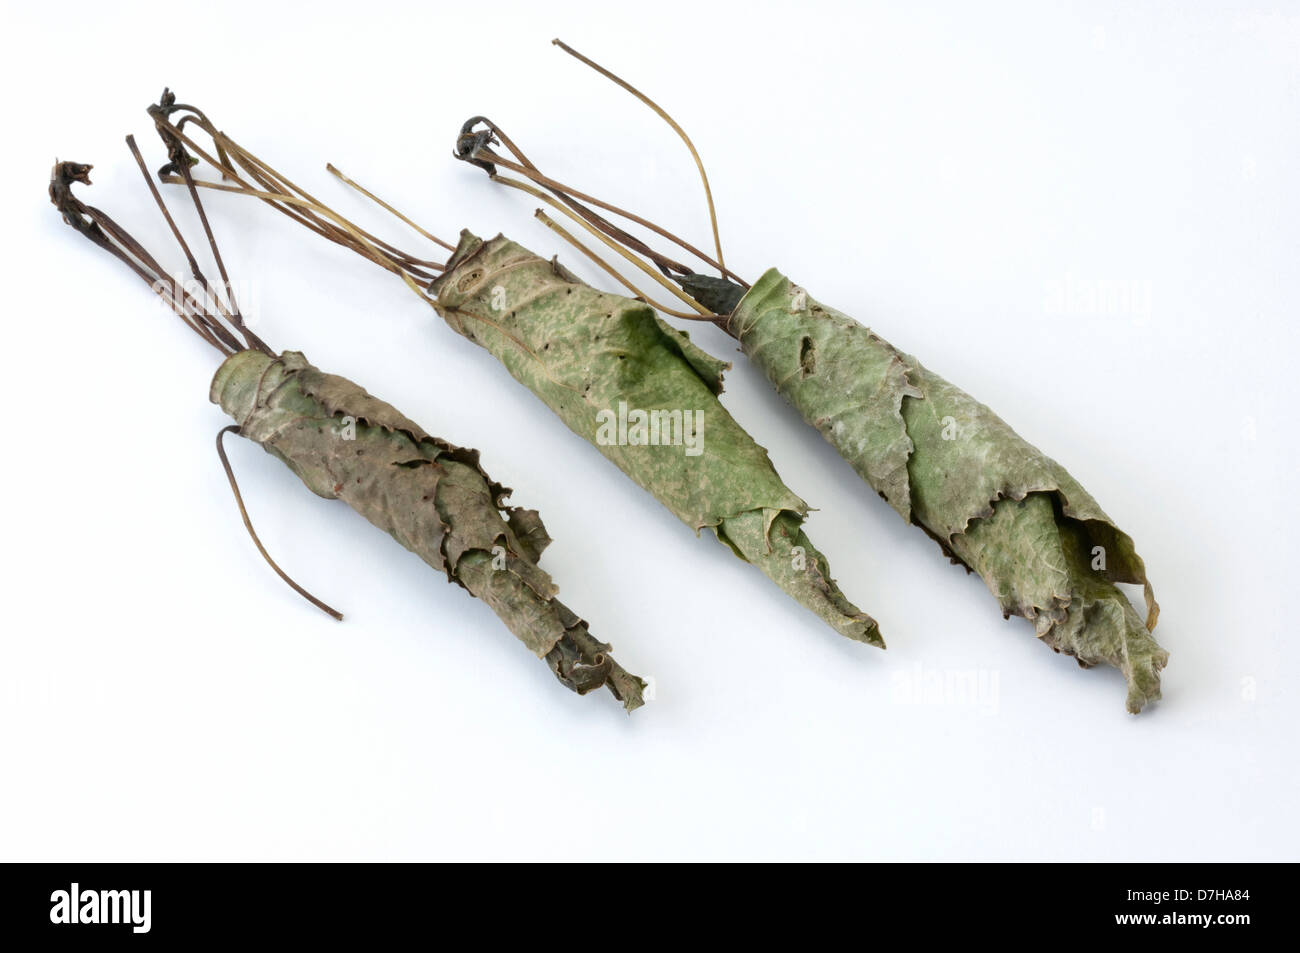 Three leaf cones 'cigars' constructed by Wine Leaf Roller Byctiscus betulae from Ash leaves Studio picture against white backgro Stock Photo